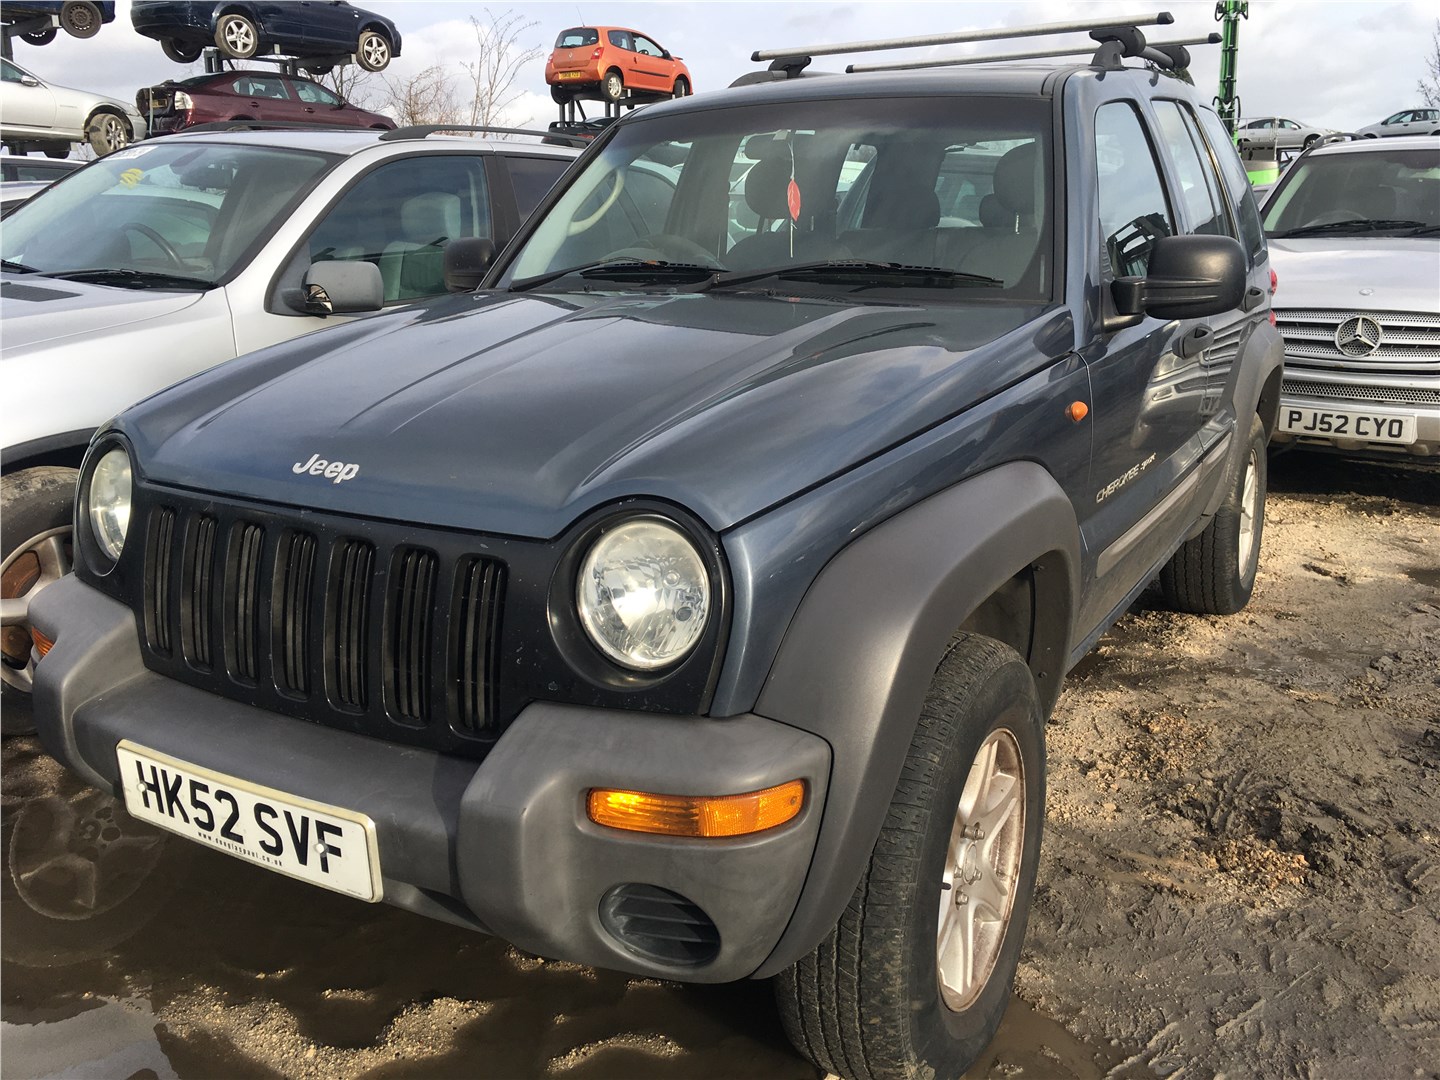 2006 jeep liberty ac fan only works on high